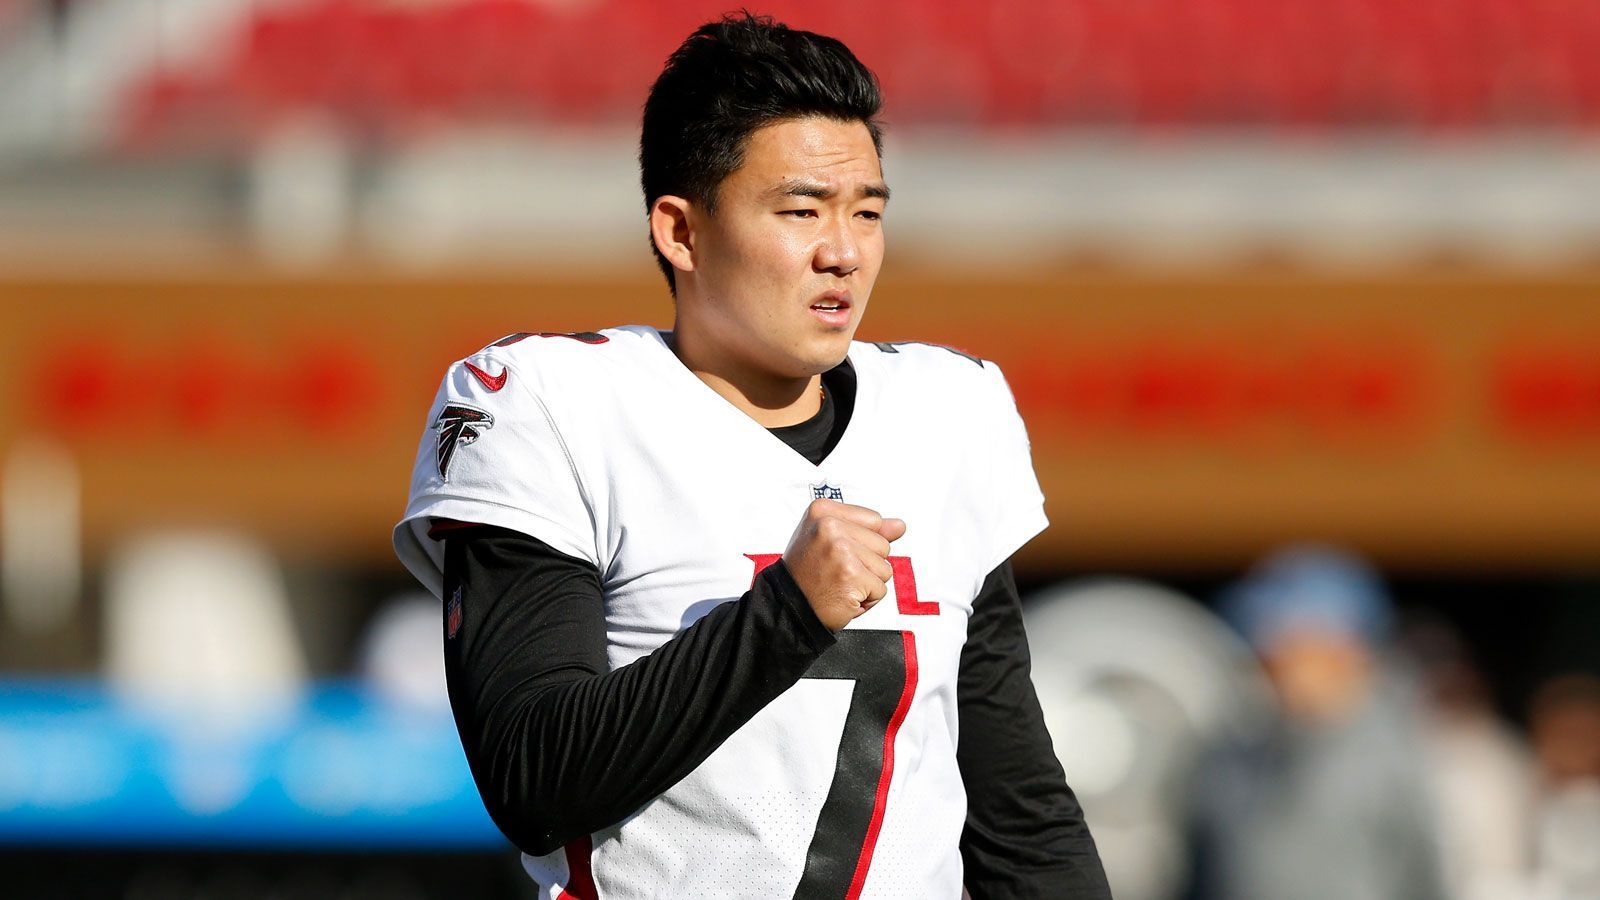 
                <strong>Platz 4 (geteilt): Younghoe Koo</strong><br>
                &#x2022; Team: Atlanta Falcons<br>&#x2022; <strong>Overall Rating: 82</strong><br>&#x2022; Key Stats: Kick Power: 92 – Kick Accuracy: 89 – Stamina: 87<br>
              